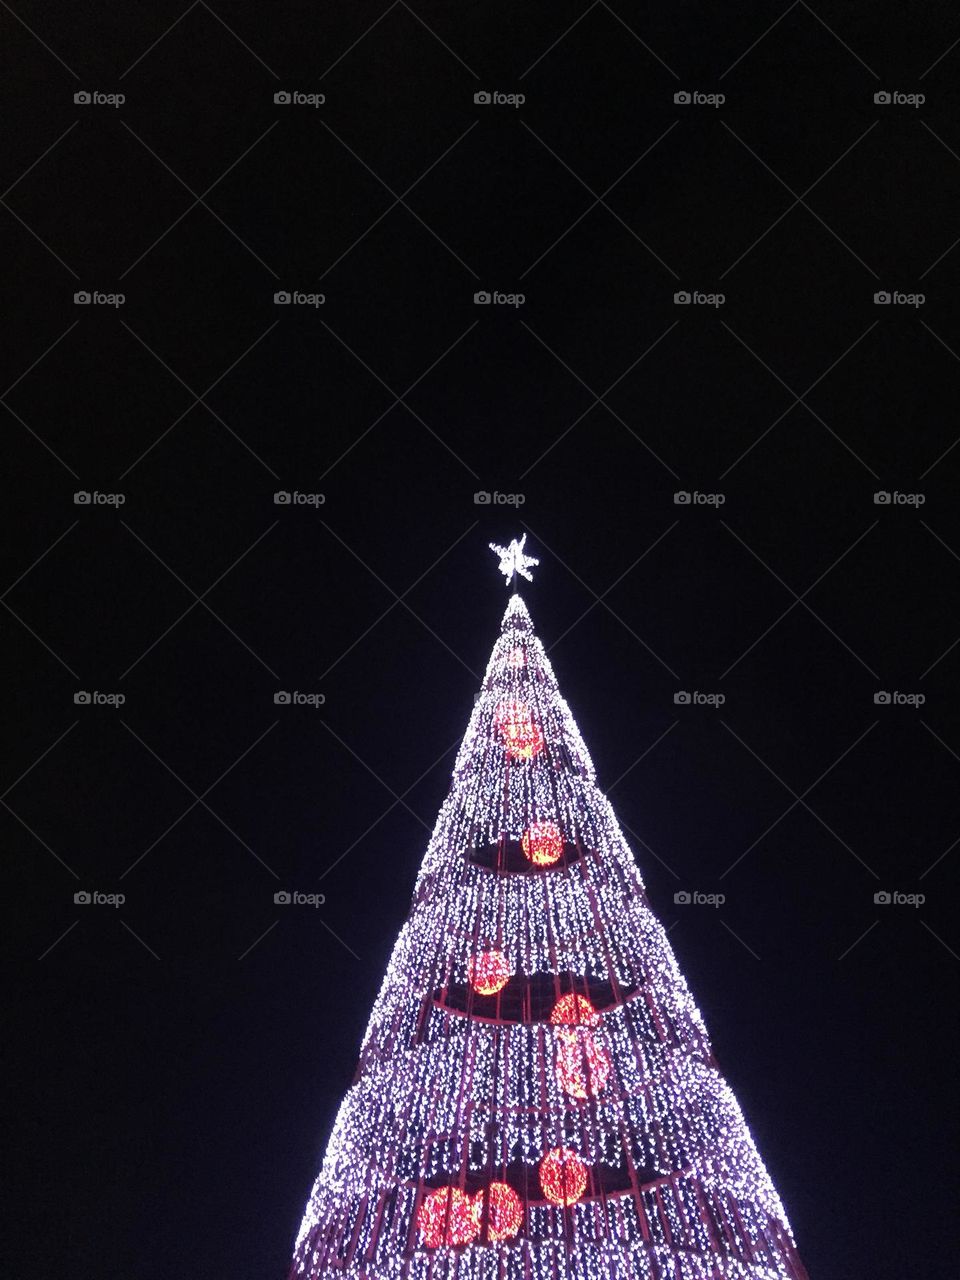 Looking up - giant Christmas tree 